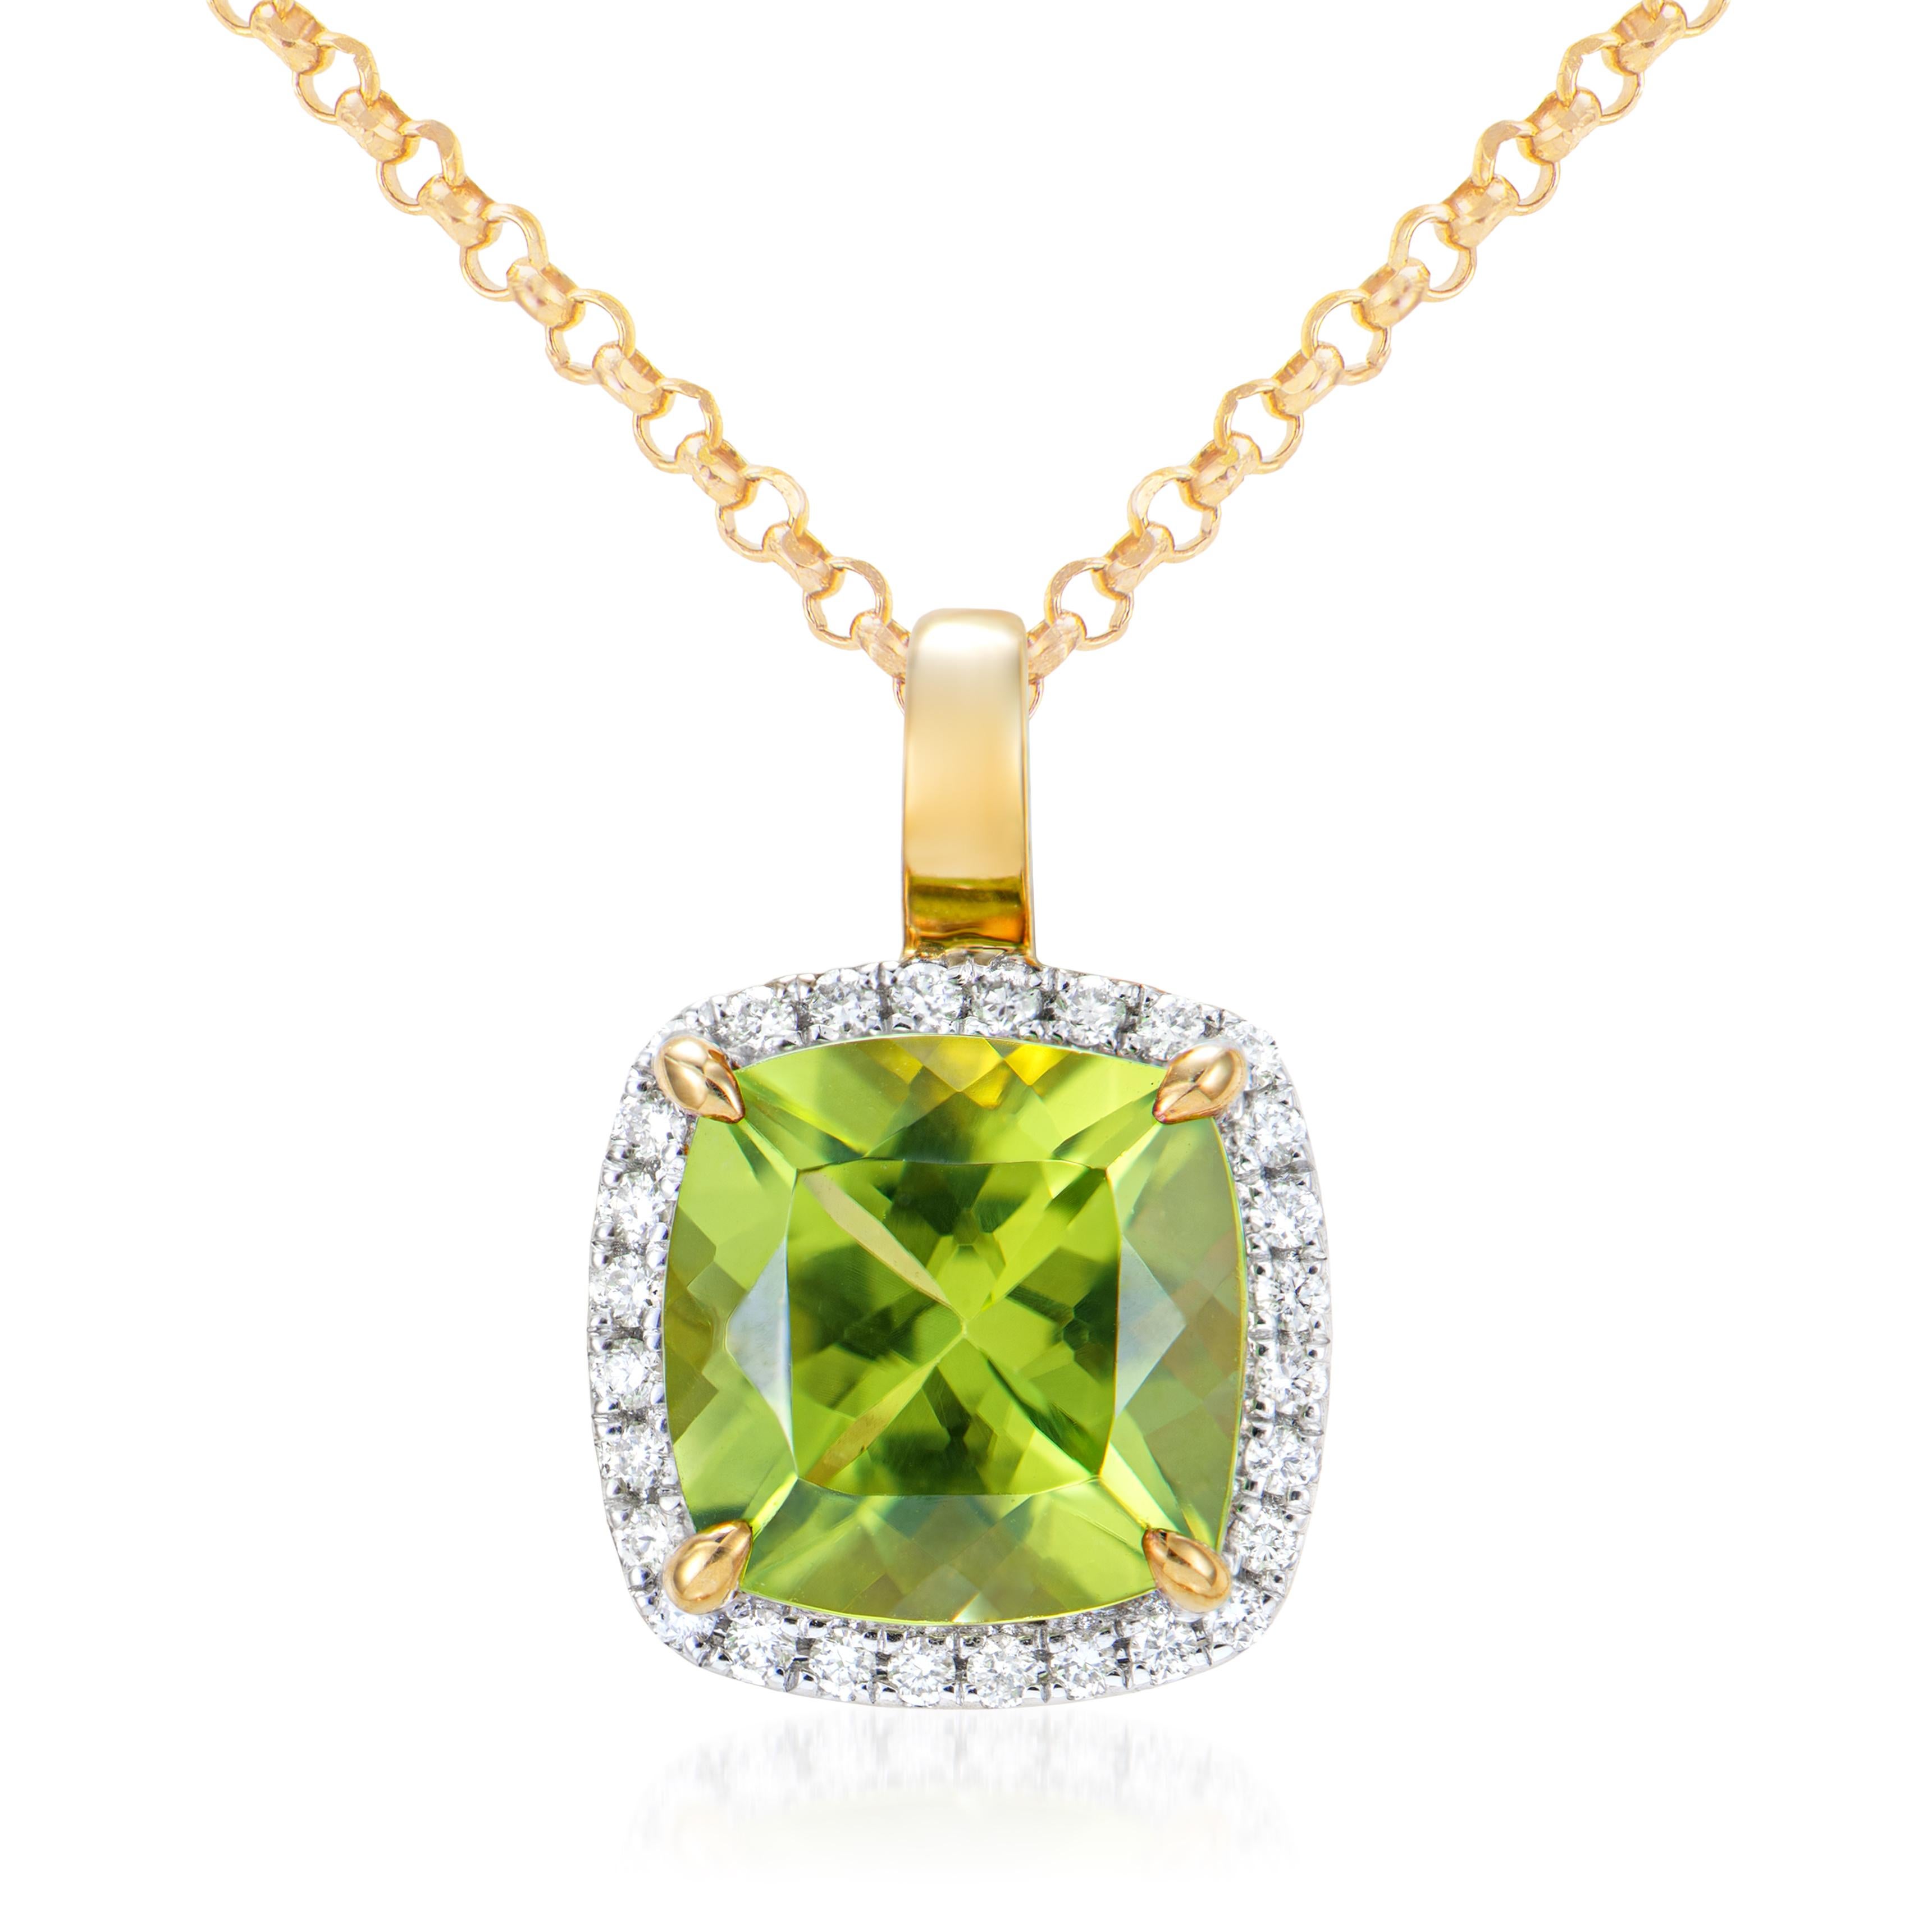 Contemporary 2.33 Carat Peridot Pendant in 18Karat Yellow Gold with White Diamond. For Sale